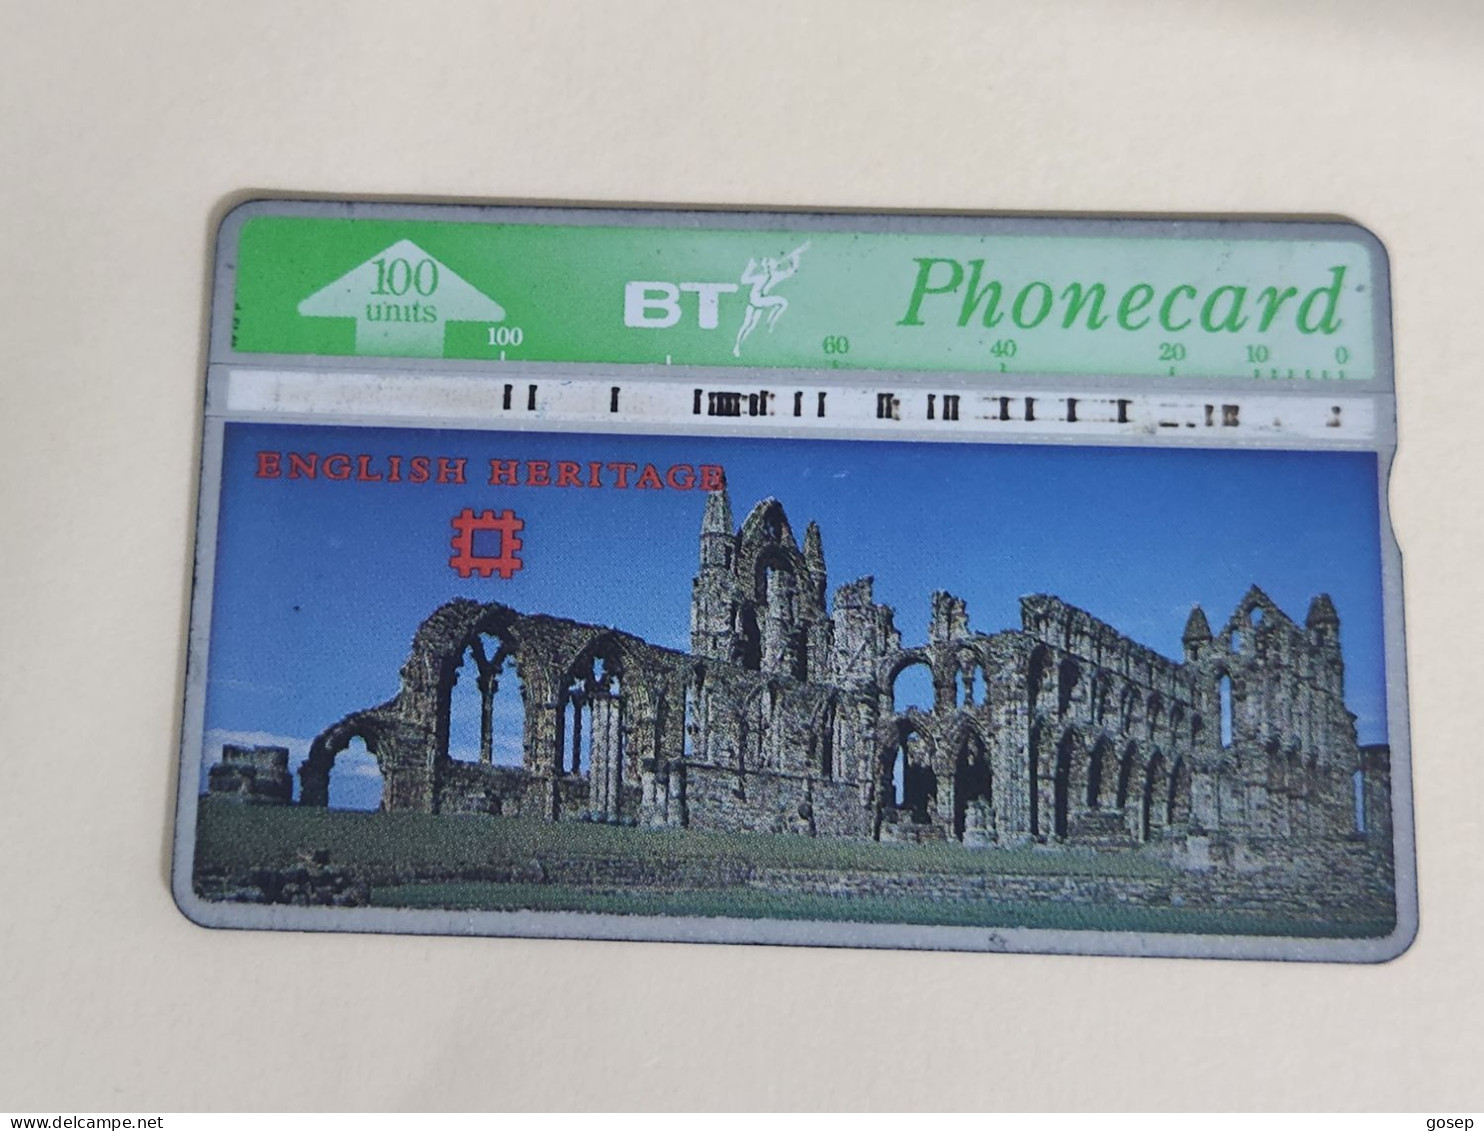 United Kingdom-(BTA122)-HERITAGE-Whitby Abbey-(212)(100units)(527G16120)price Cataloge3.00£-used+1card Prepiad Free - BT Advertising Issues